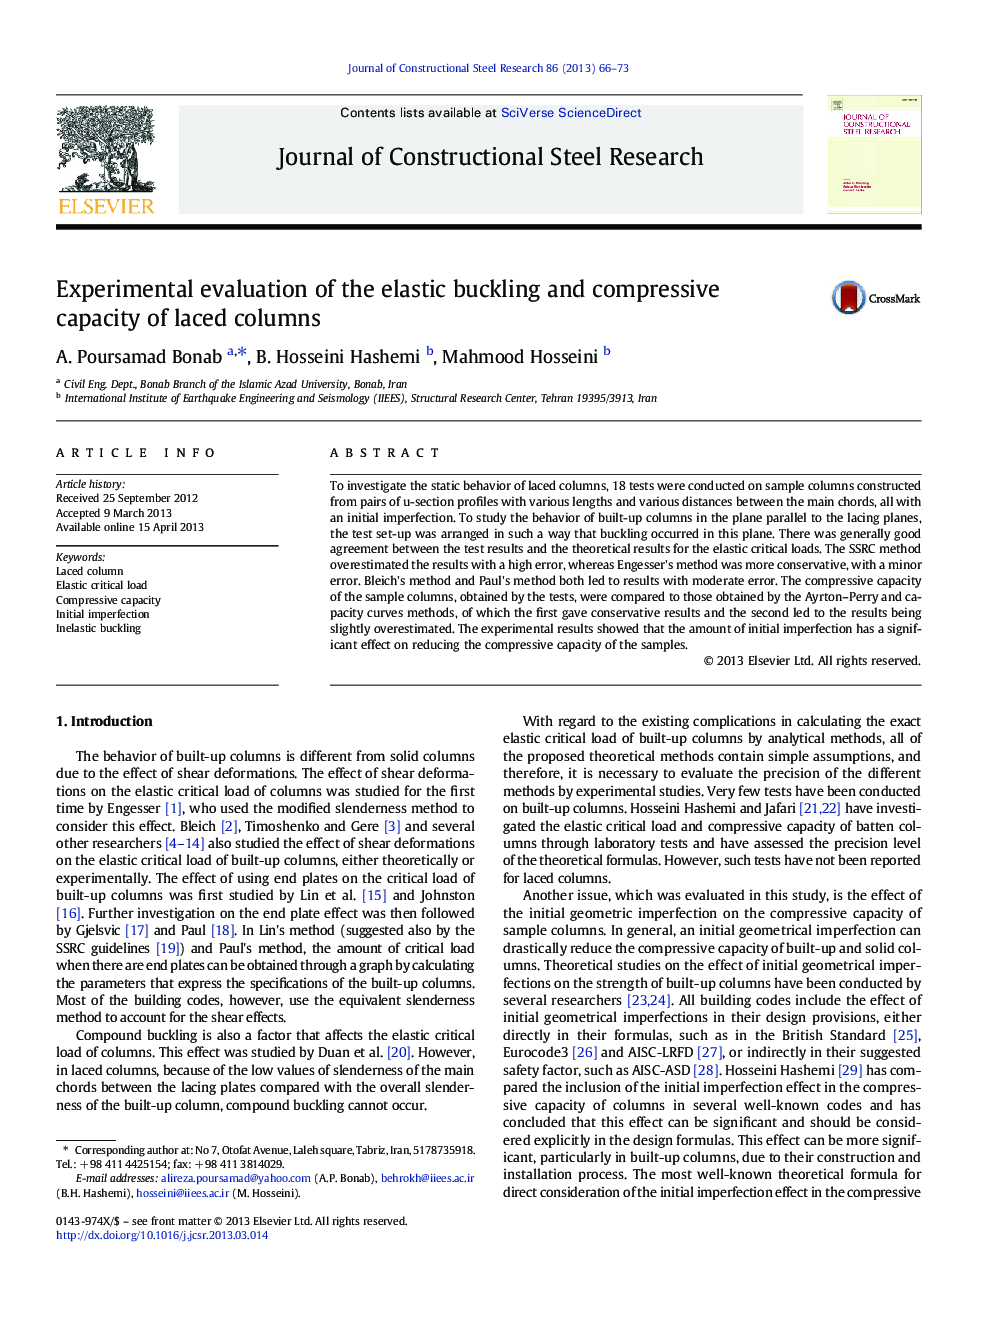 Experimental evaluation of the elastic buckling and compressive capacity of laced columns